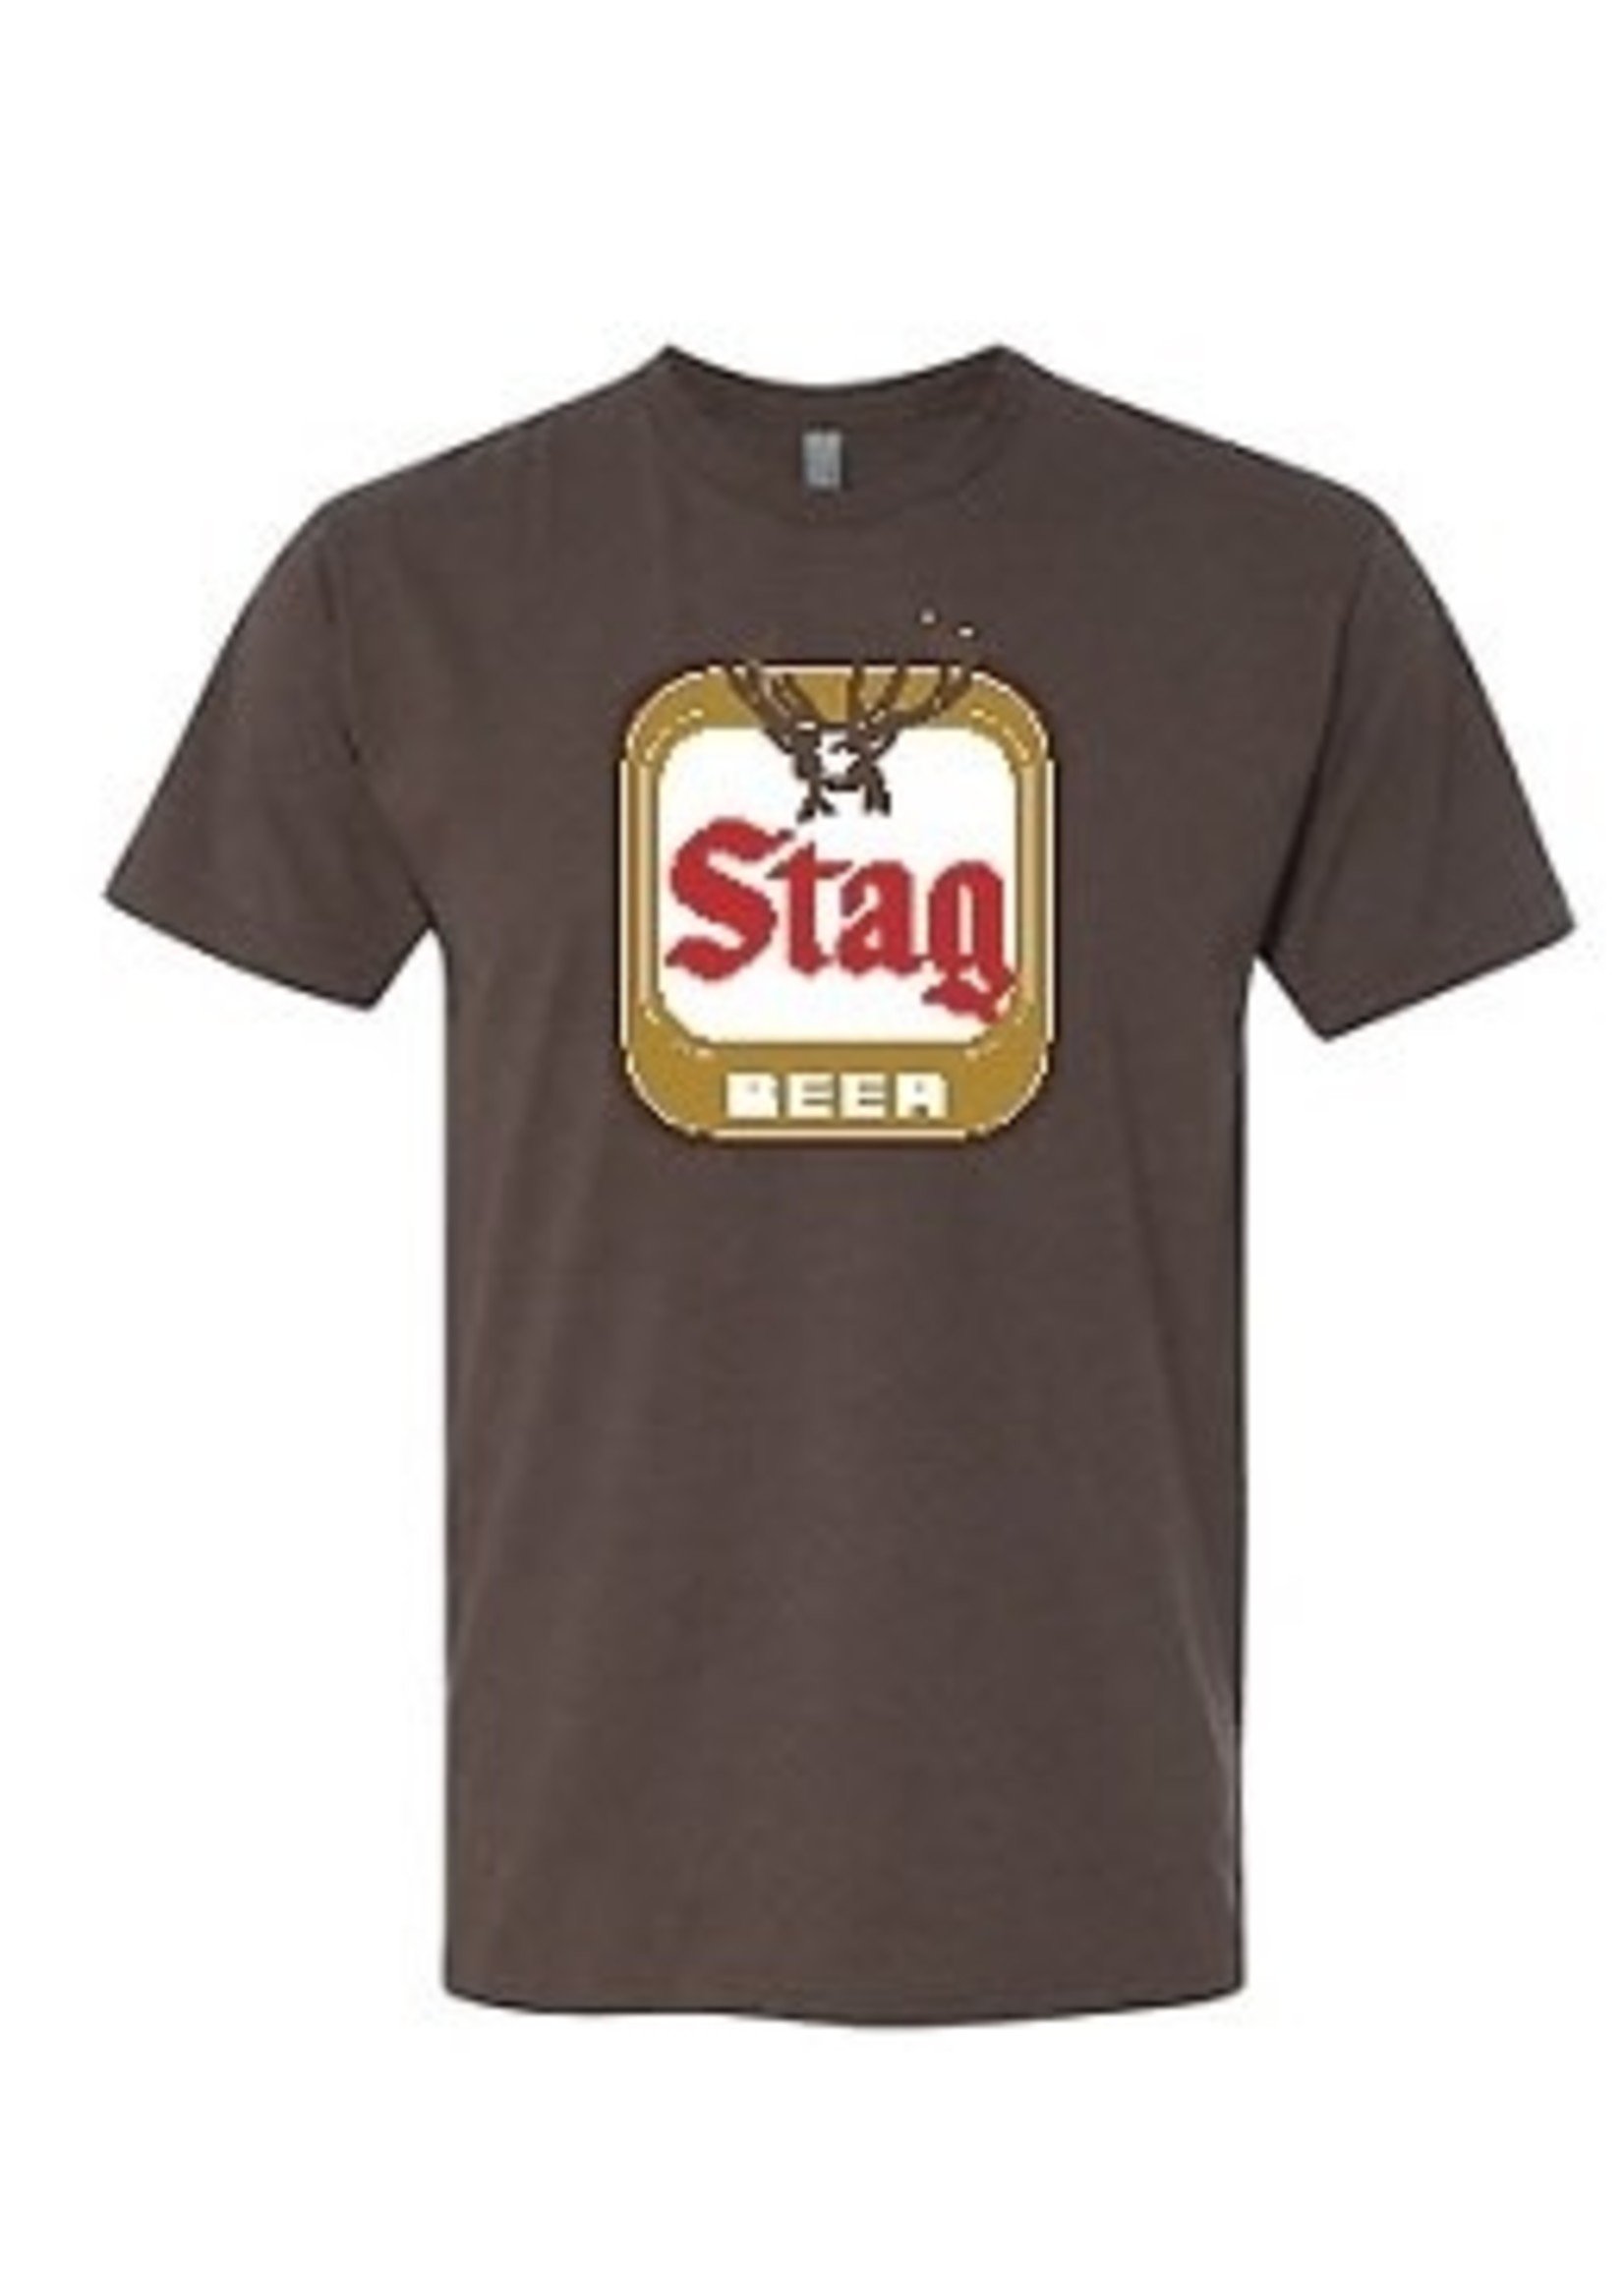 American Needle STAG BEER Brass Tacks